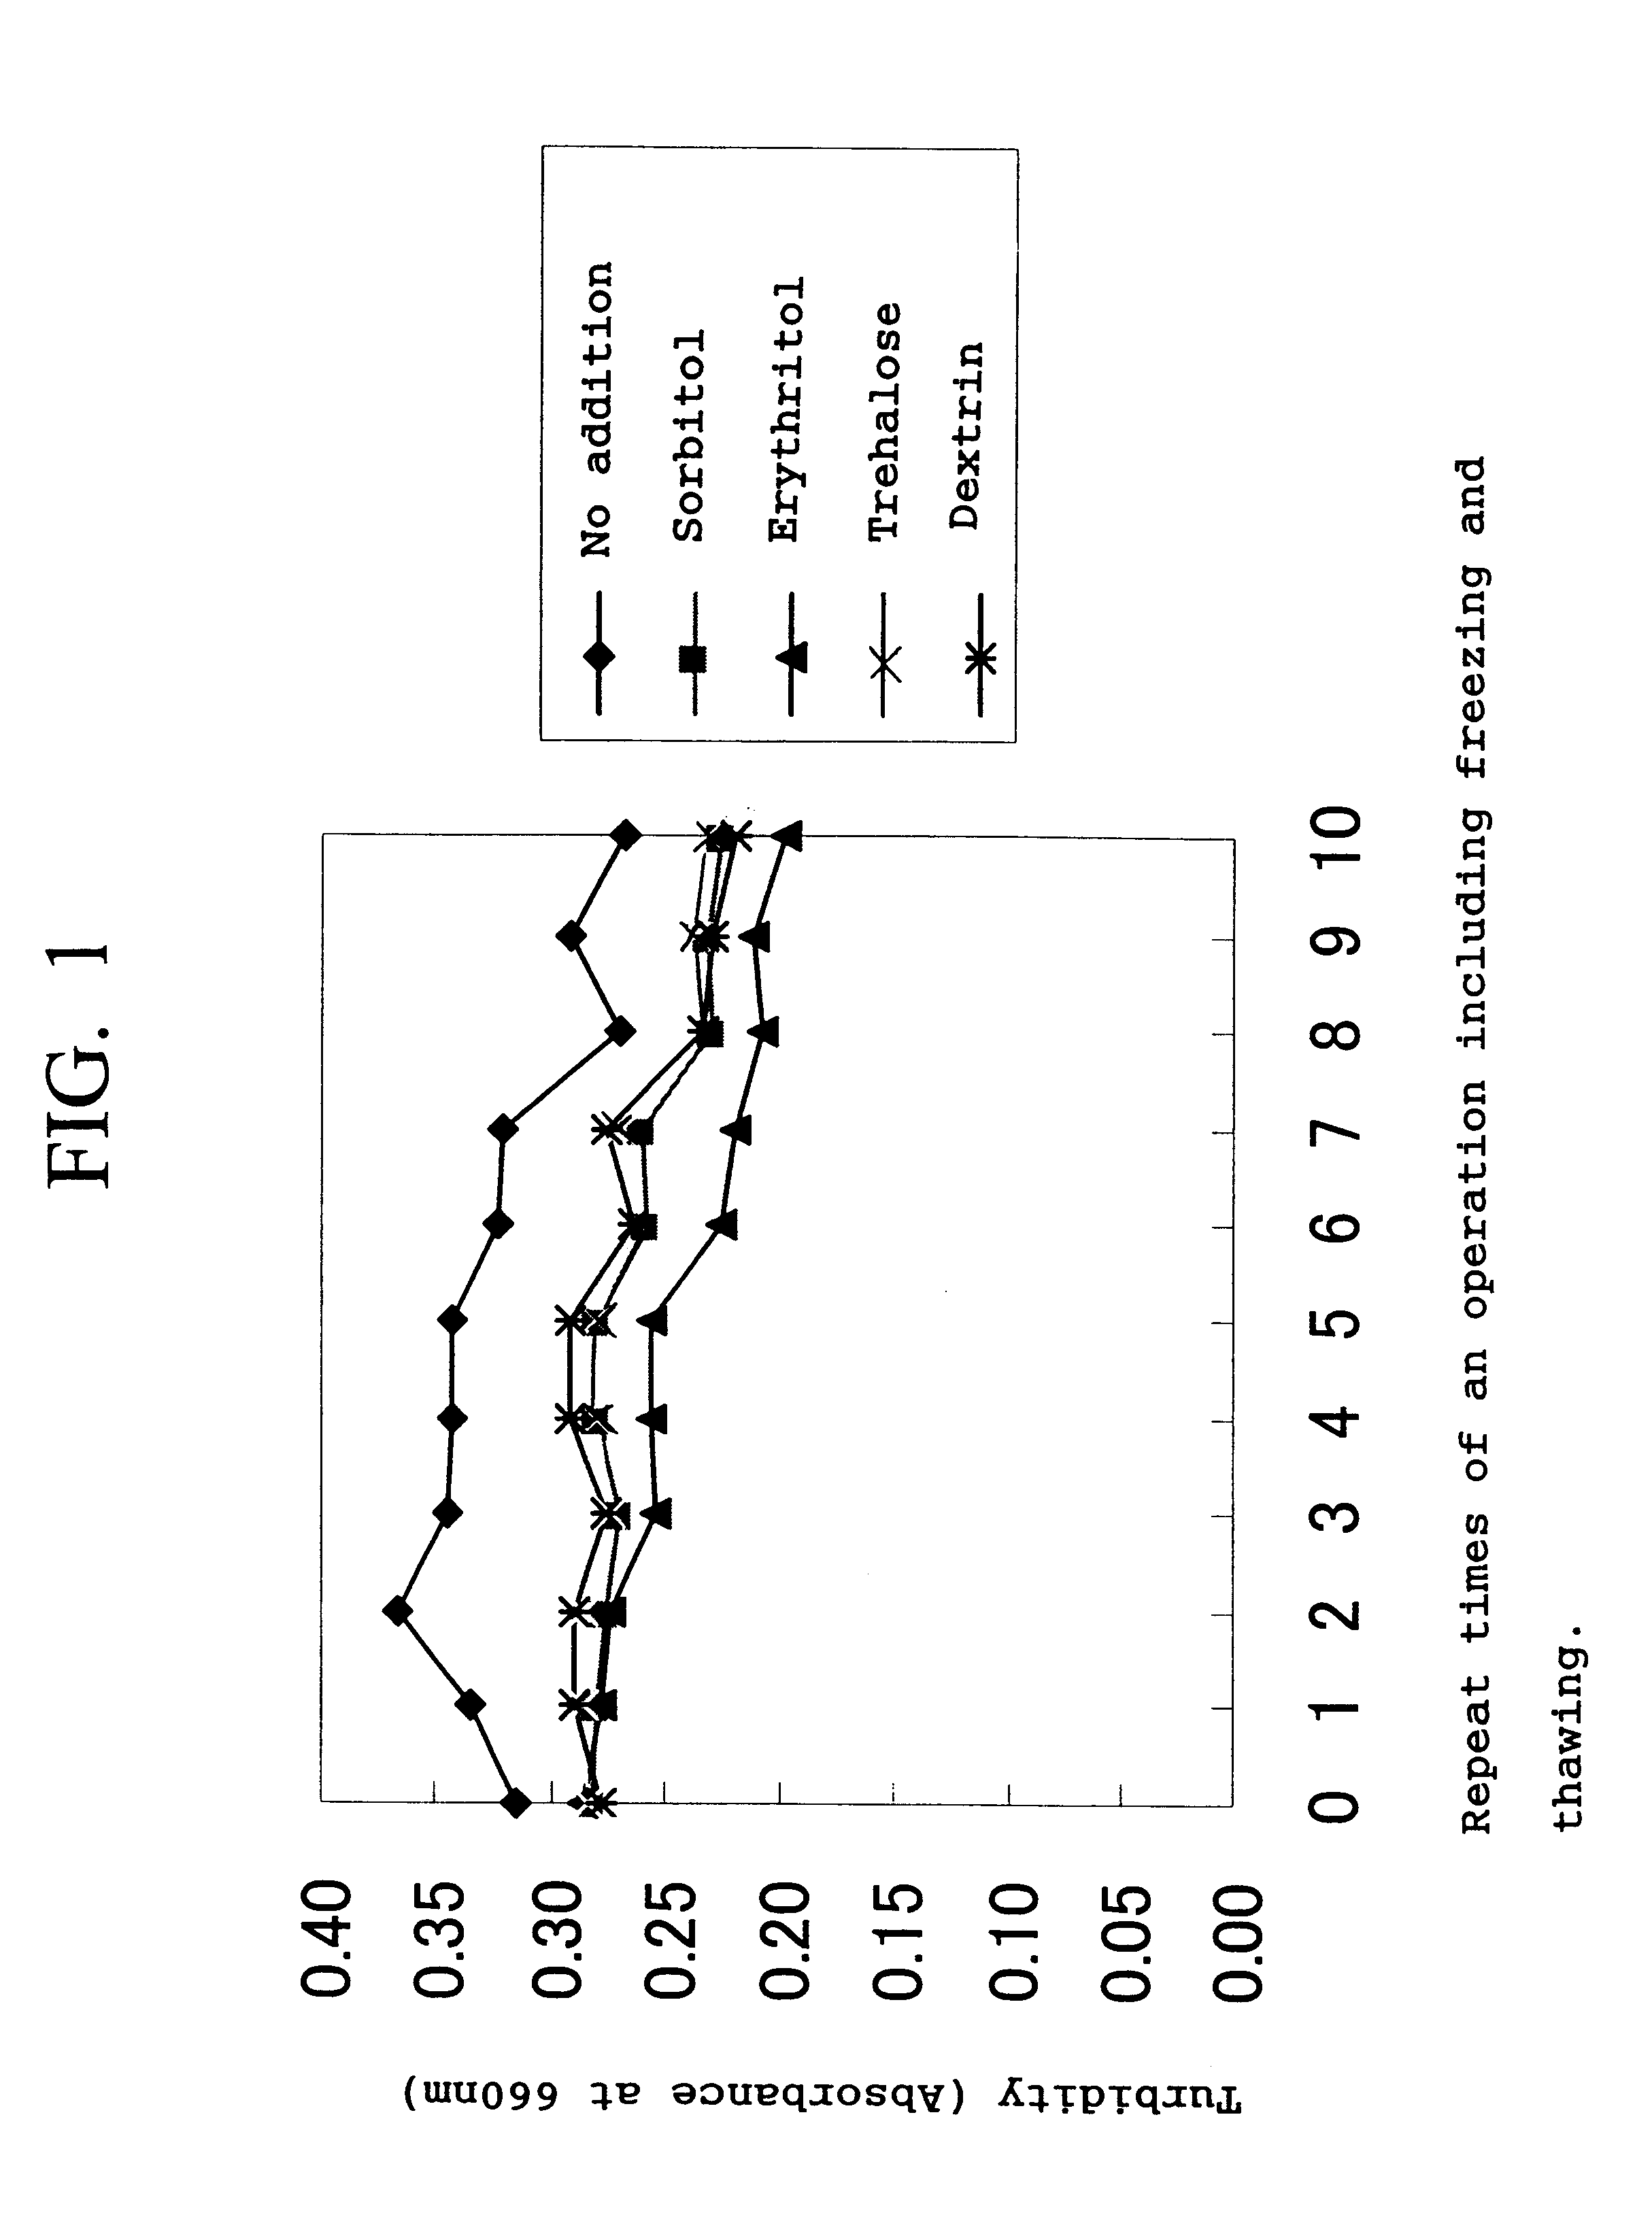 Iron-containing protein composition